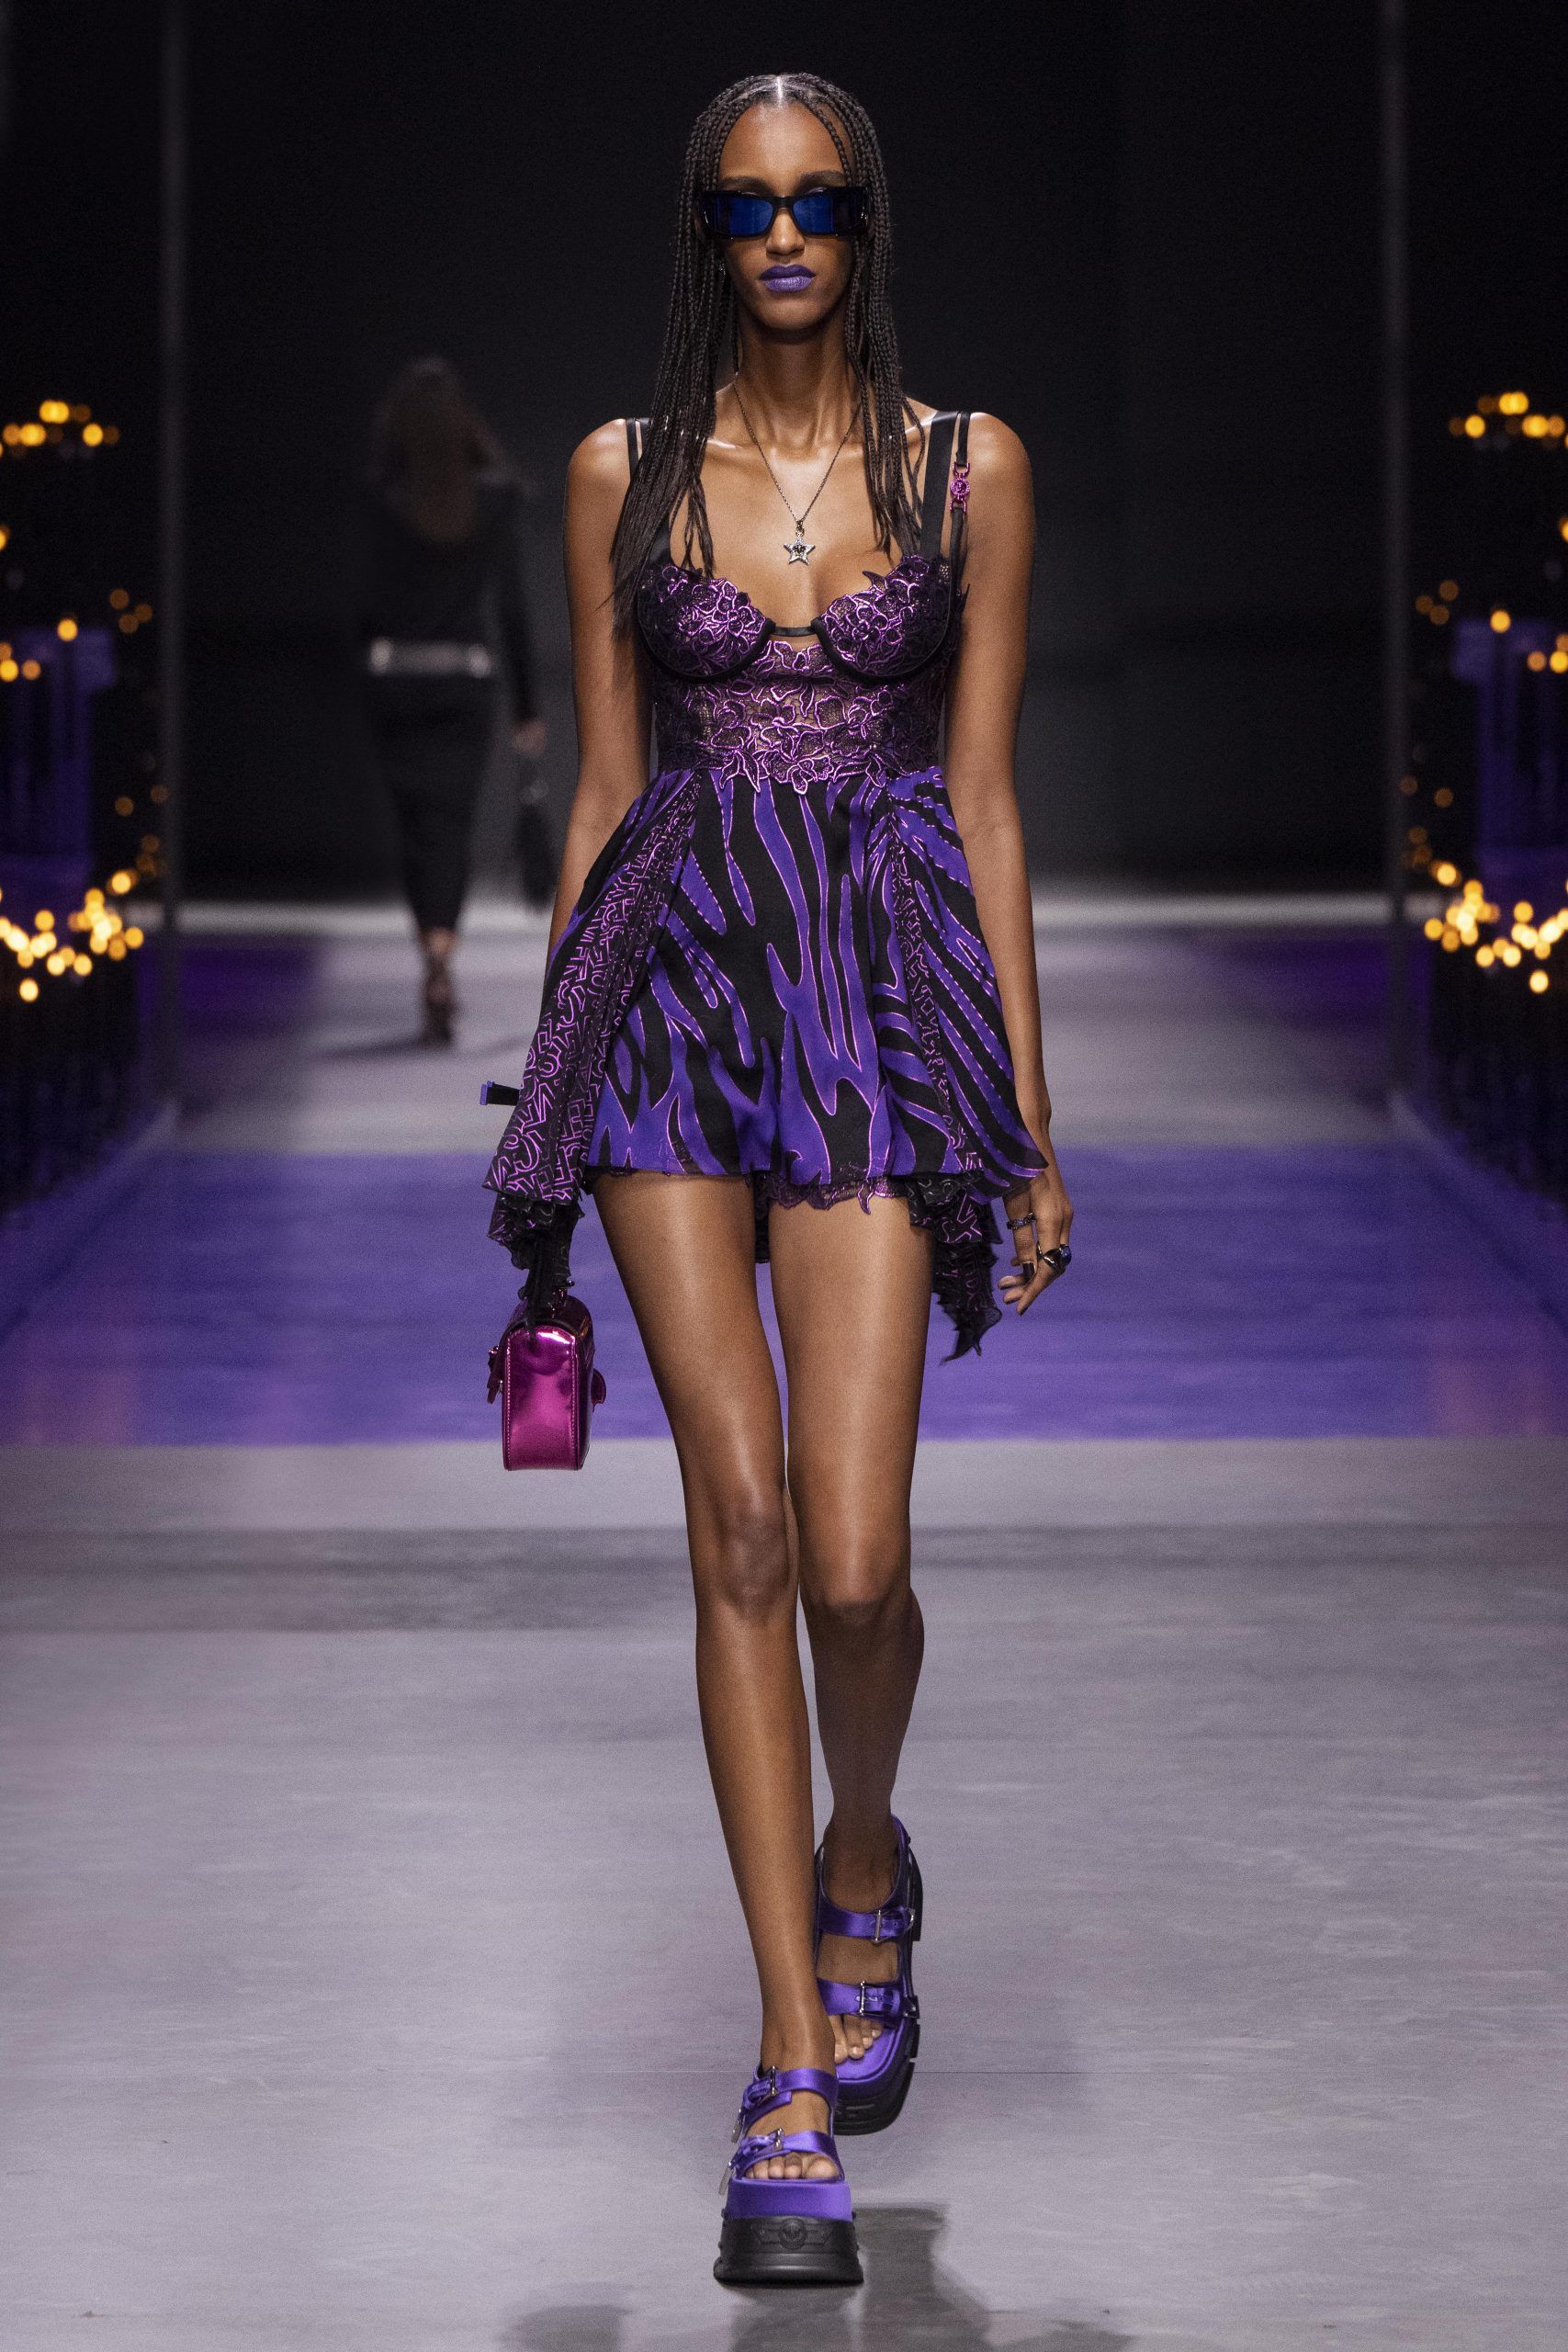 Versace Spring Summer 2023 is a reflection of the Dark Gothic Goddess